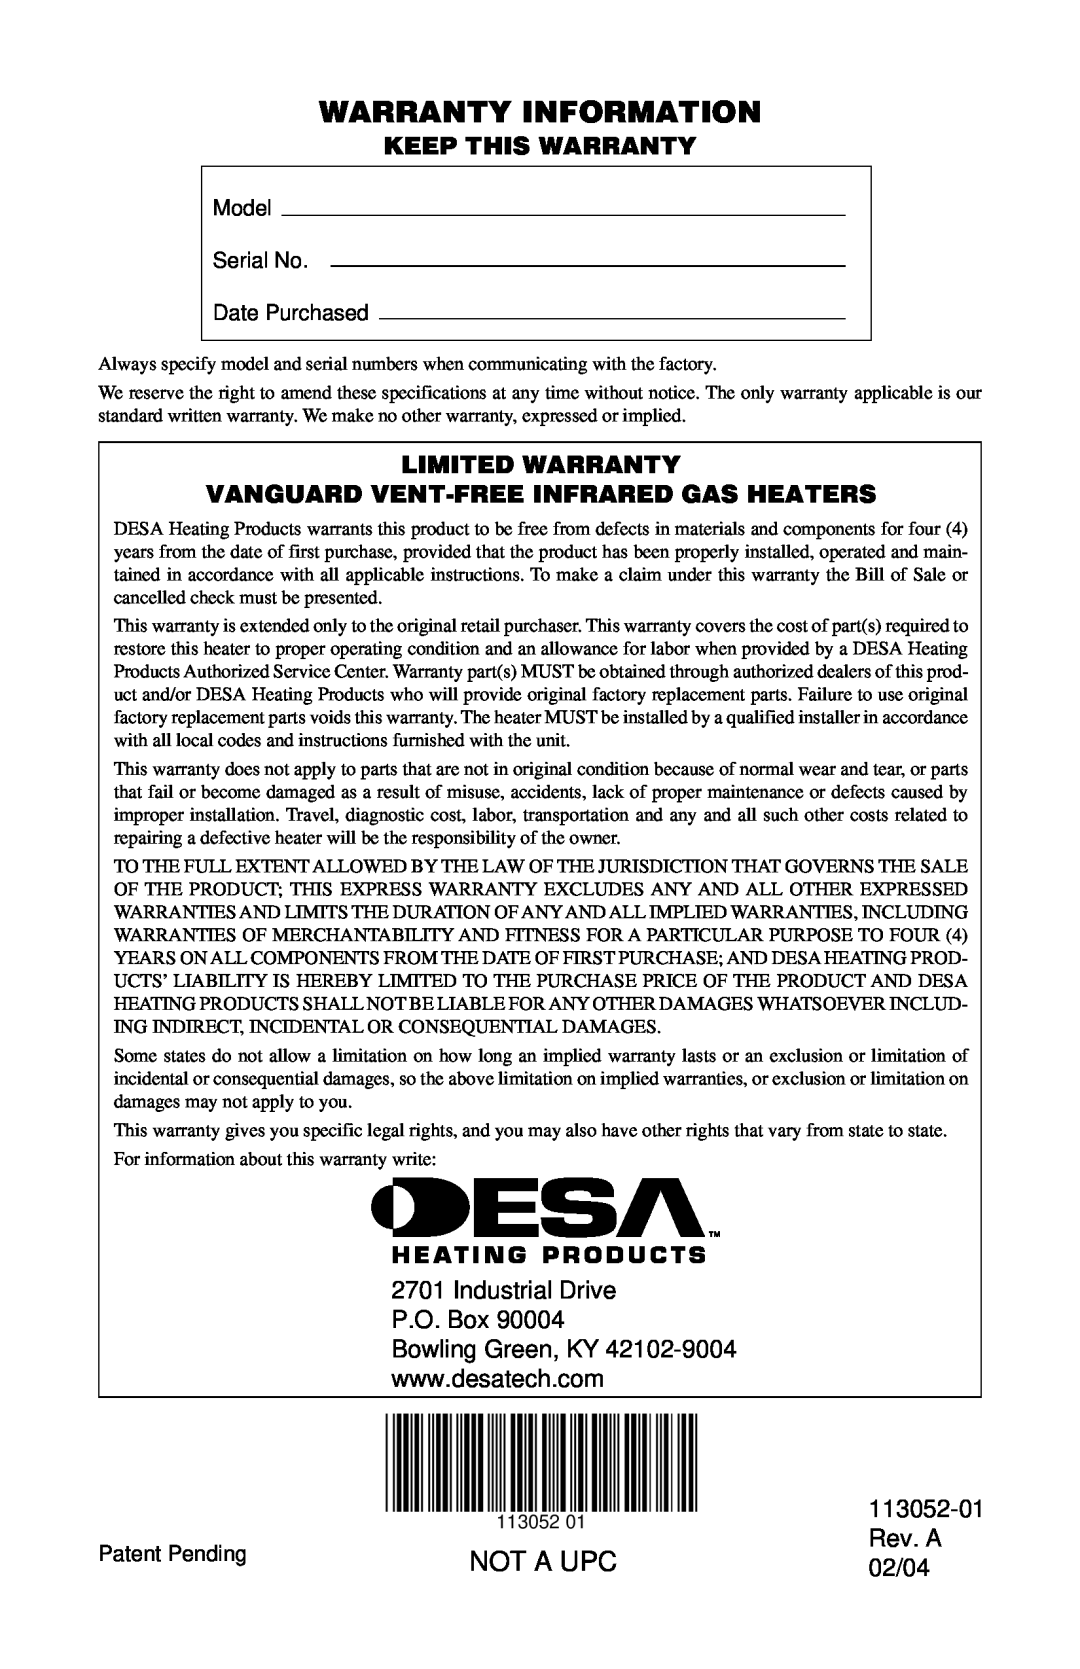 Vanguard Heating VP26TA VN30A Keep This Warranty, Limited Warranty, Vanguard Vent-Freeinfrared Gas Heaters, 113052-01 